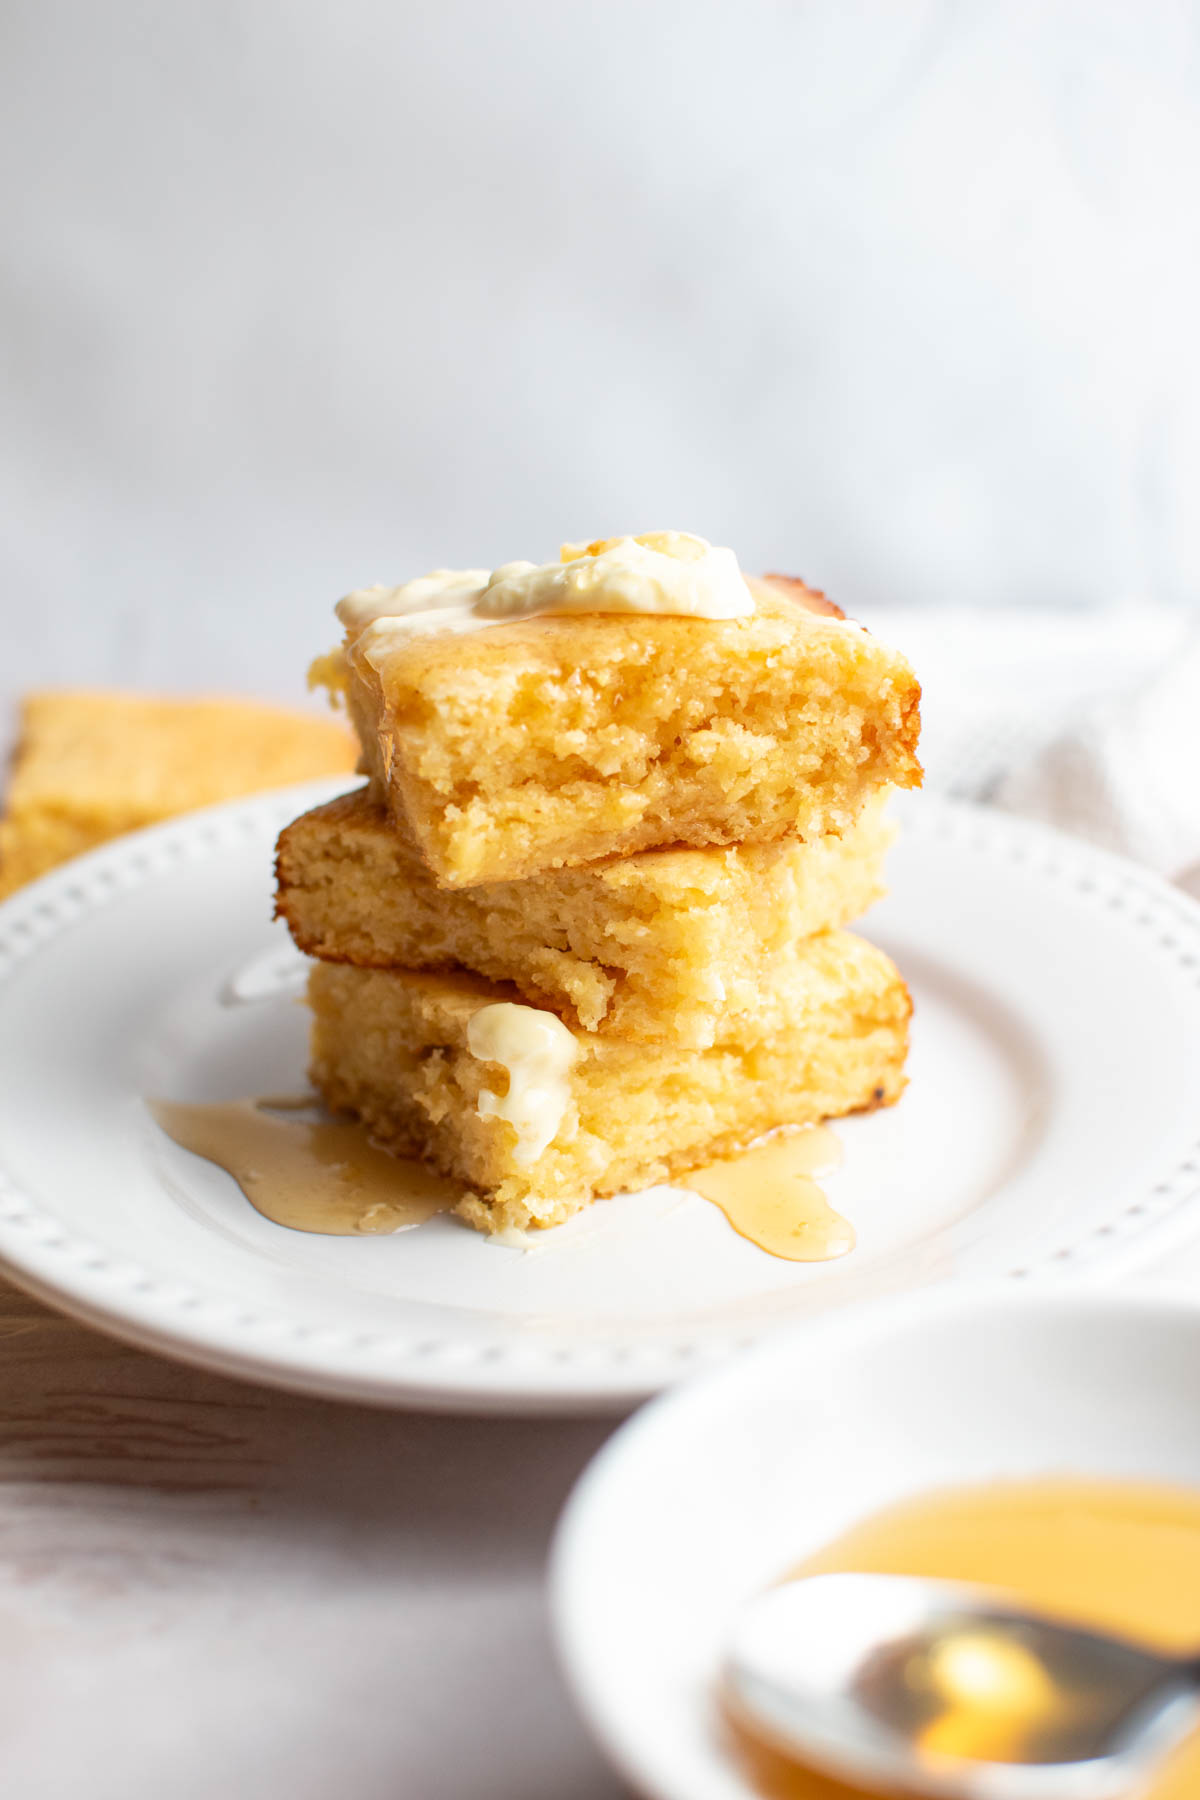 Stack of 3 pieces of cornbread with butter on top and covered in honey on white plate.